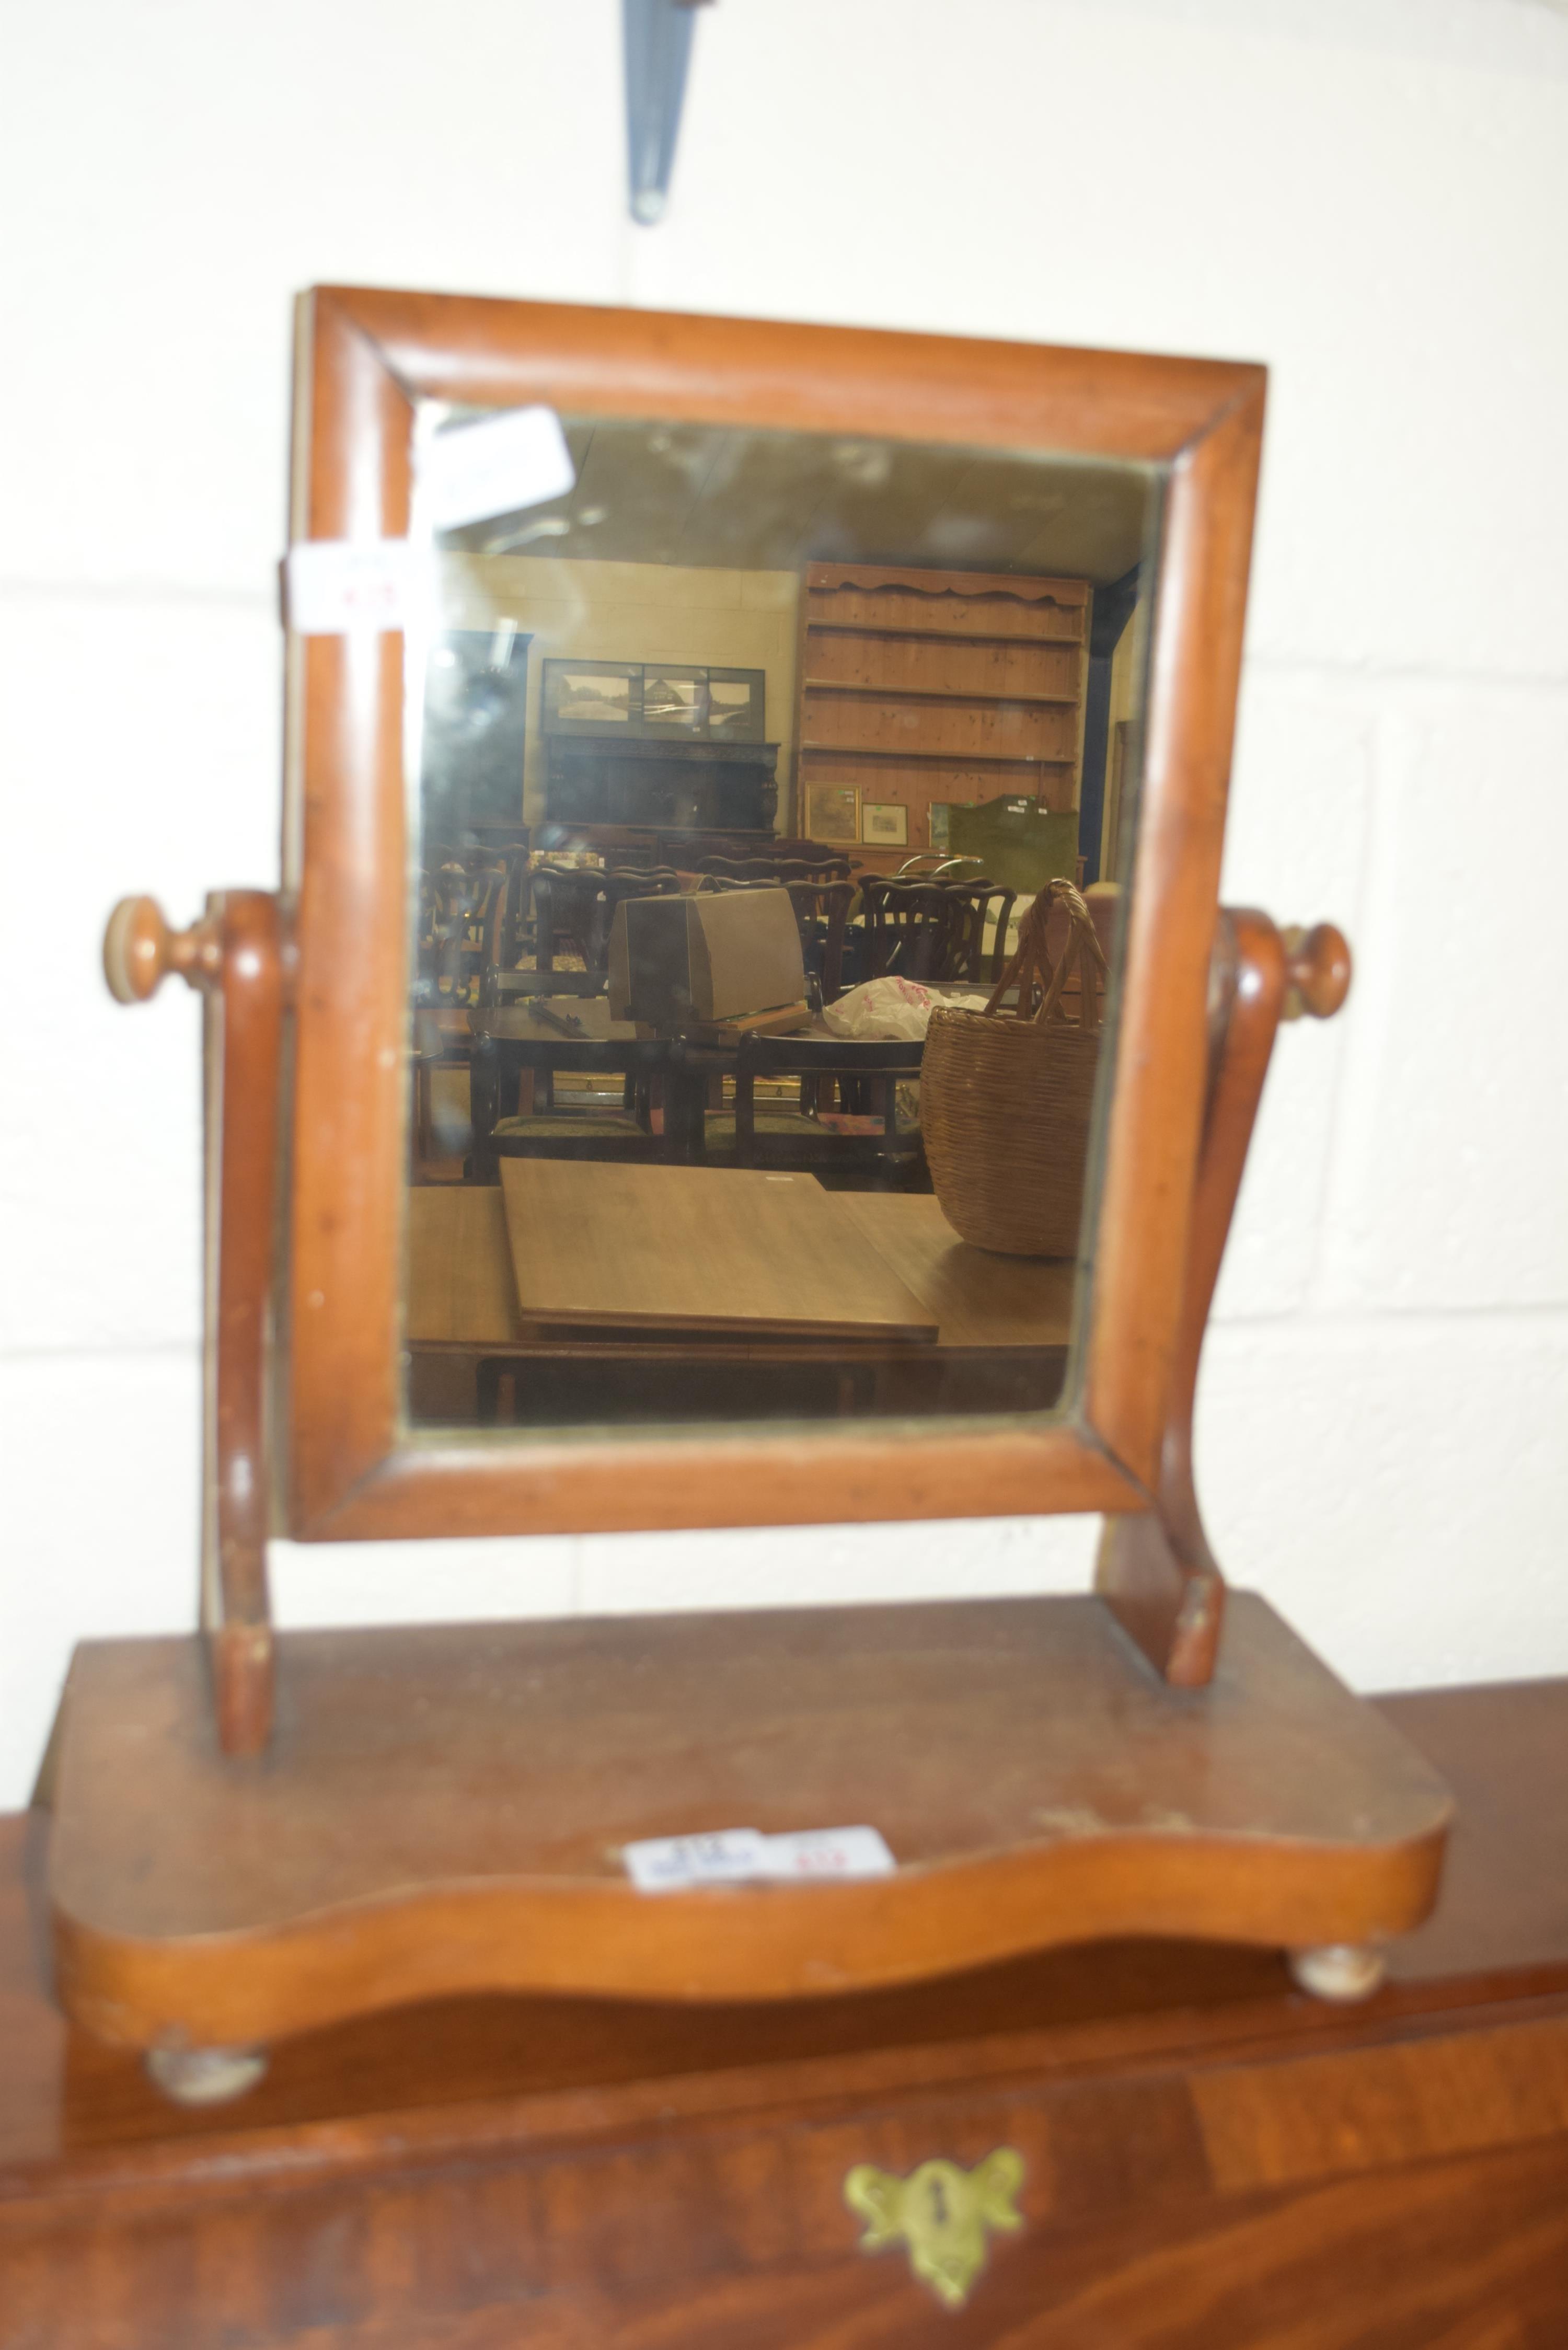 LATE VICTORIAN SWING DRESSING TABLE MIRROR, 46CM HIGH